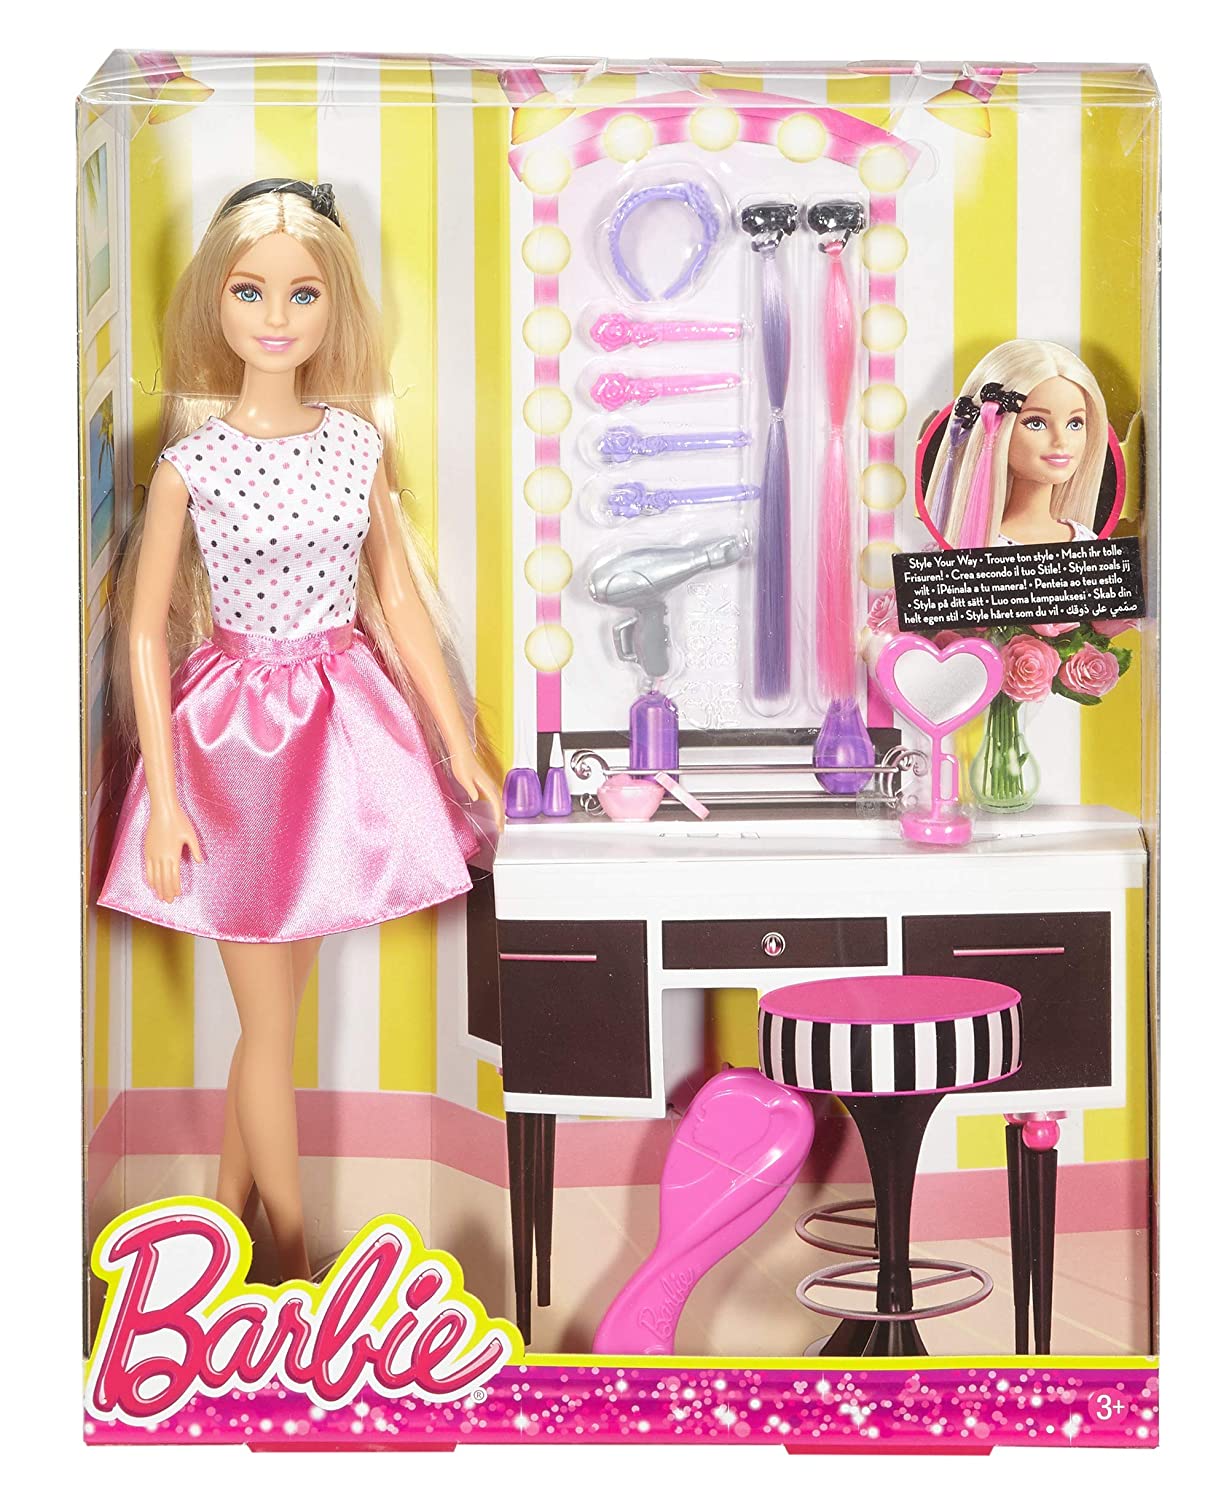 Barbie Djp Doll Playset With Hair Styling Accessories Multi Color Toyoos